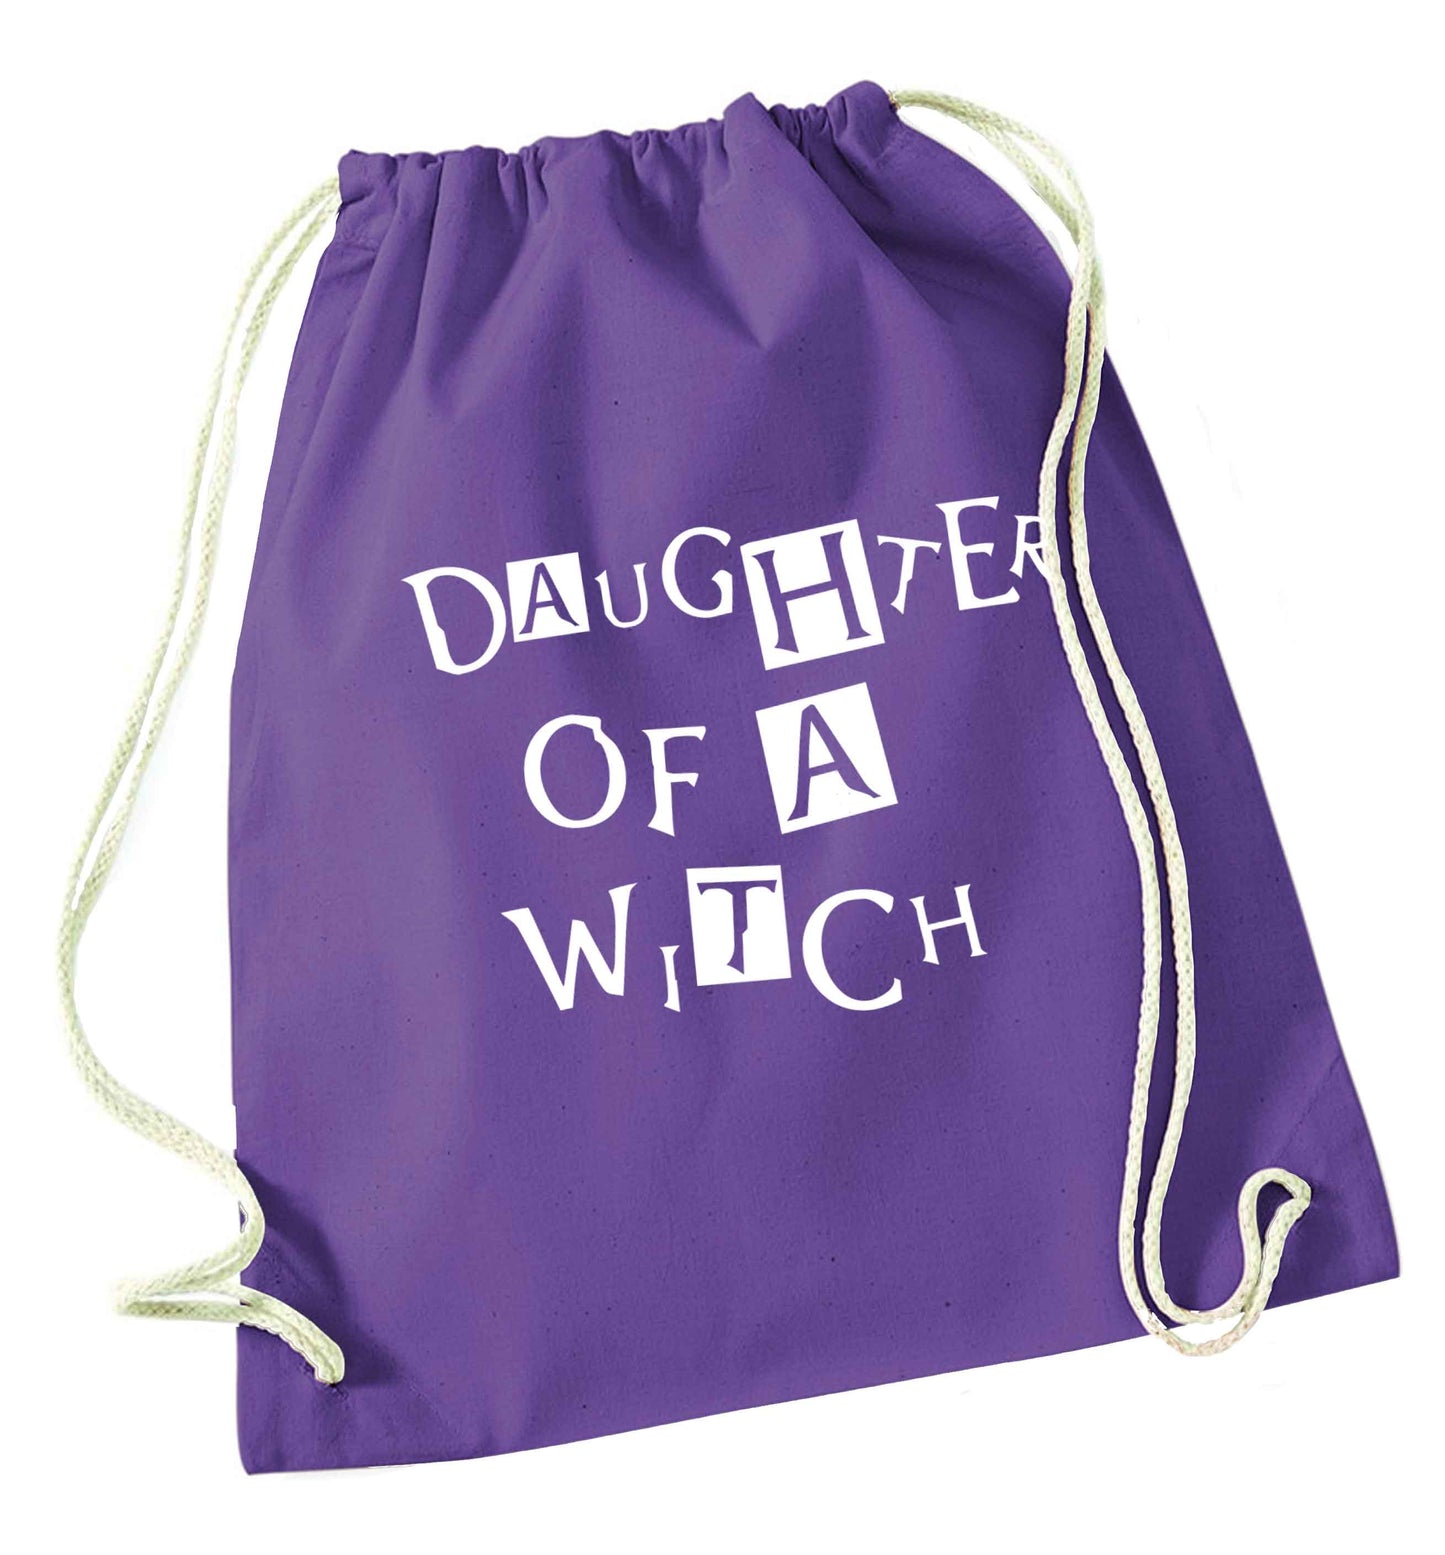 Daughter of a witch purple drawstring bag